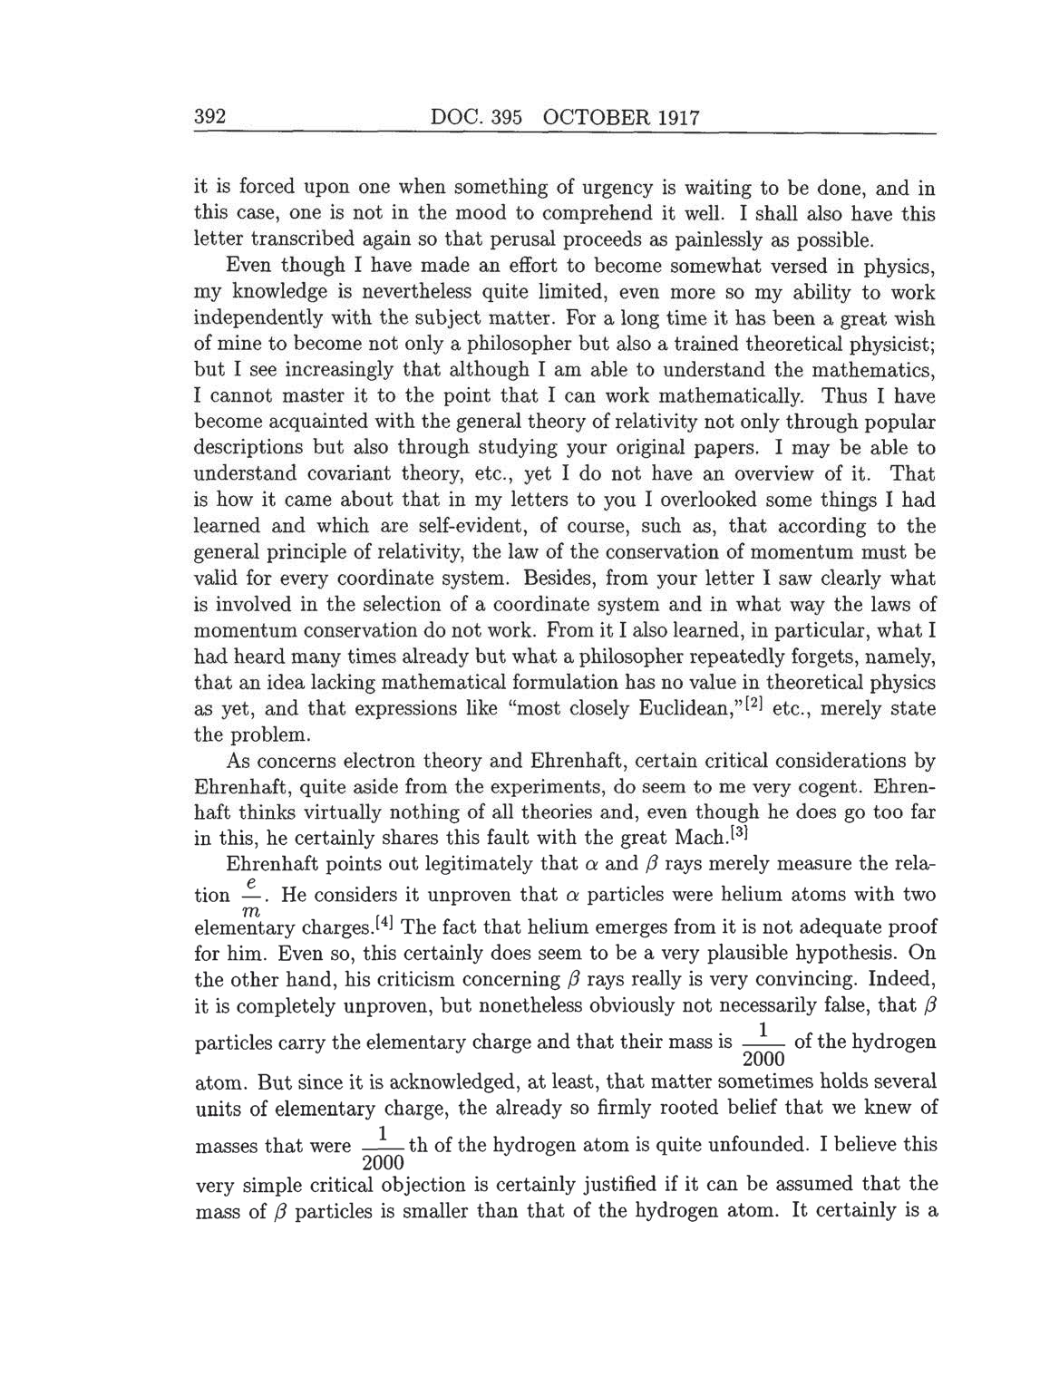 Volume 8: The Berlin Years: Correspondence, 1914-1918 (English translation supplement) page 392